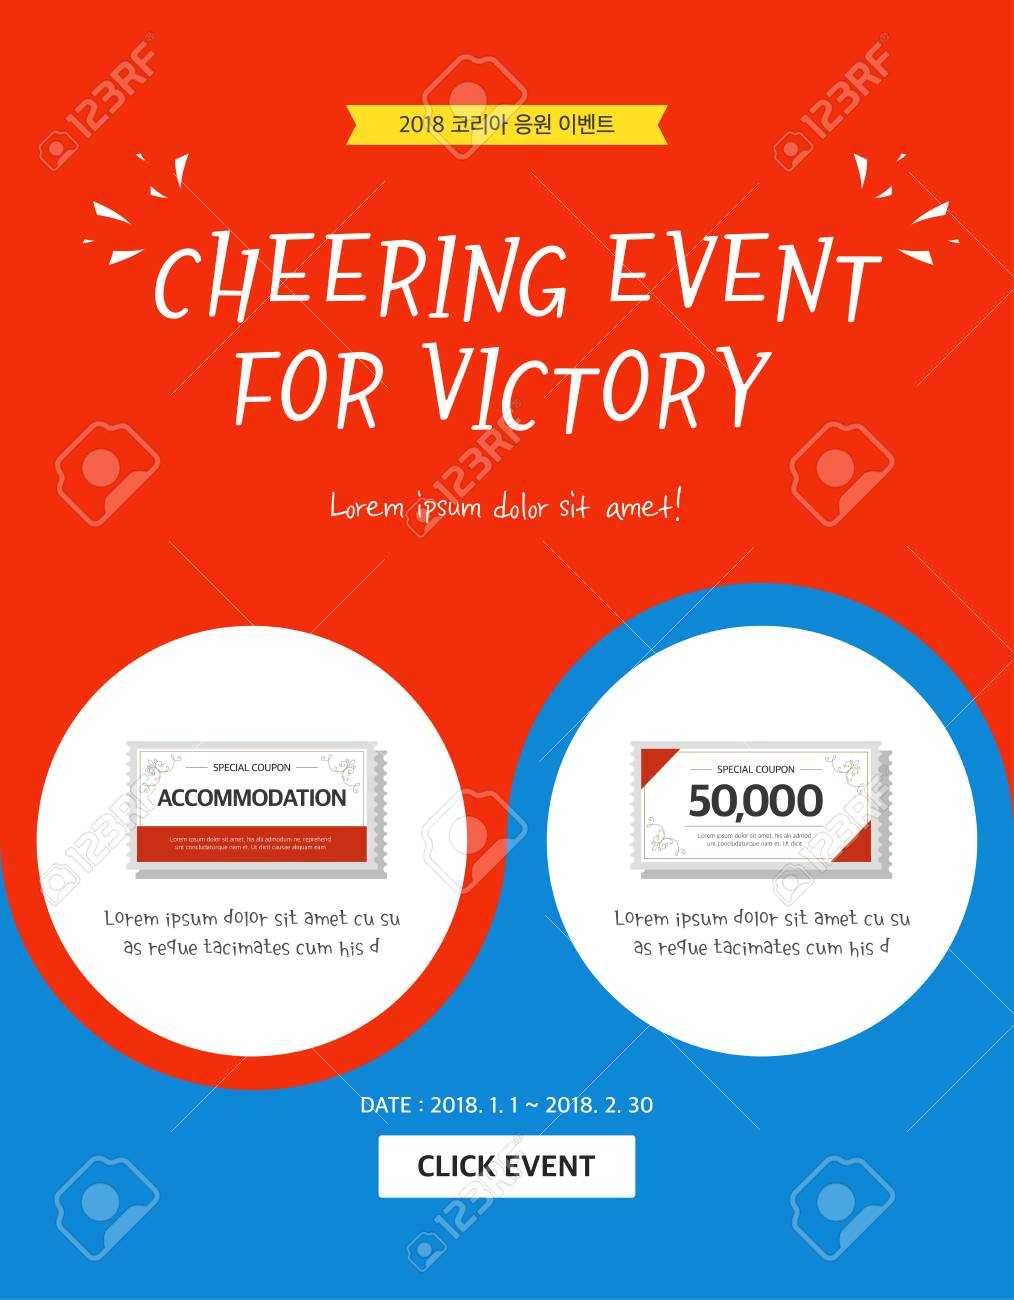 Event Banner Template – Cheering Event For Victory Regarding Event Banner Template